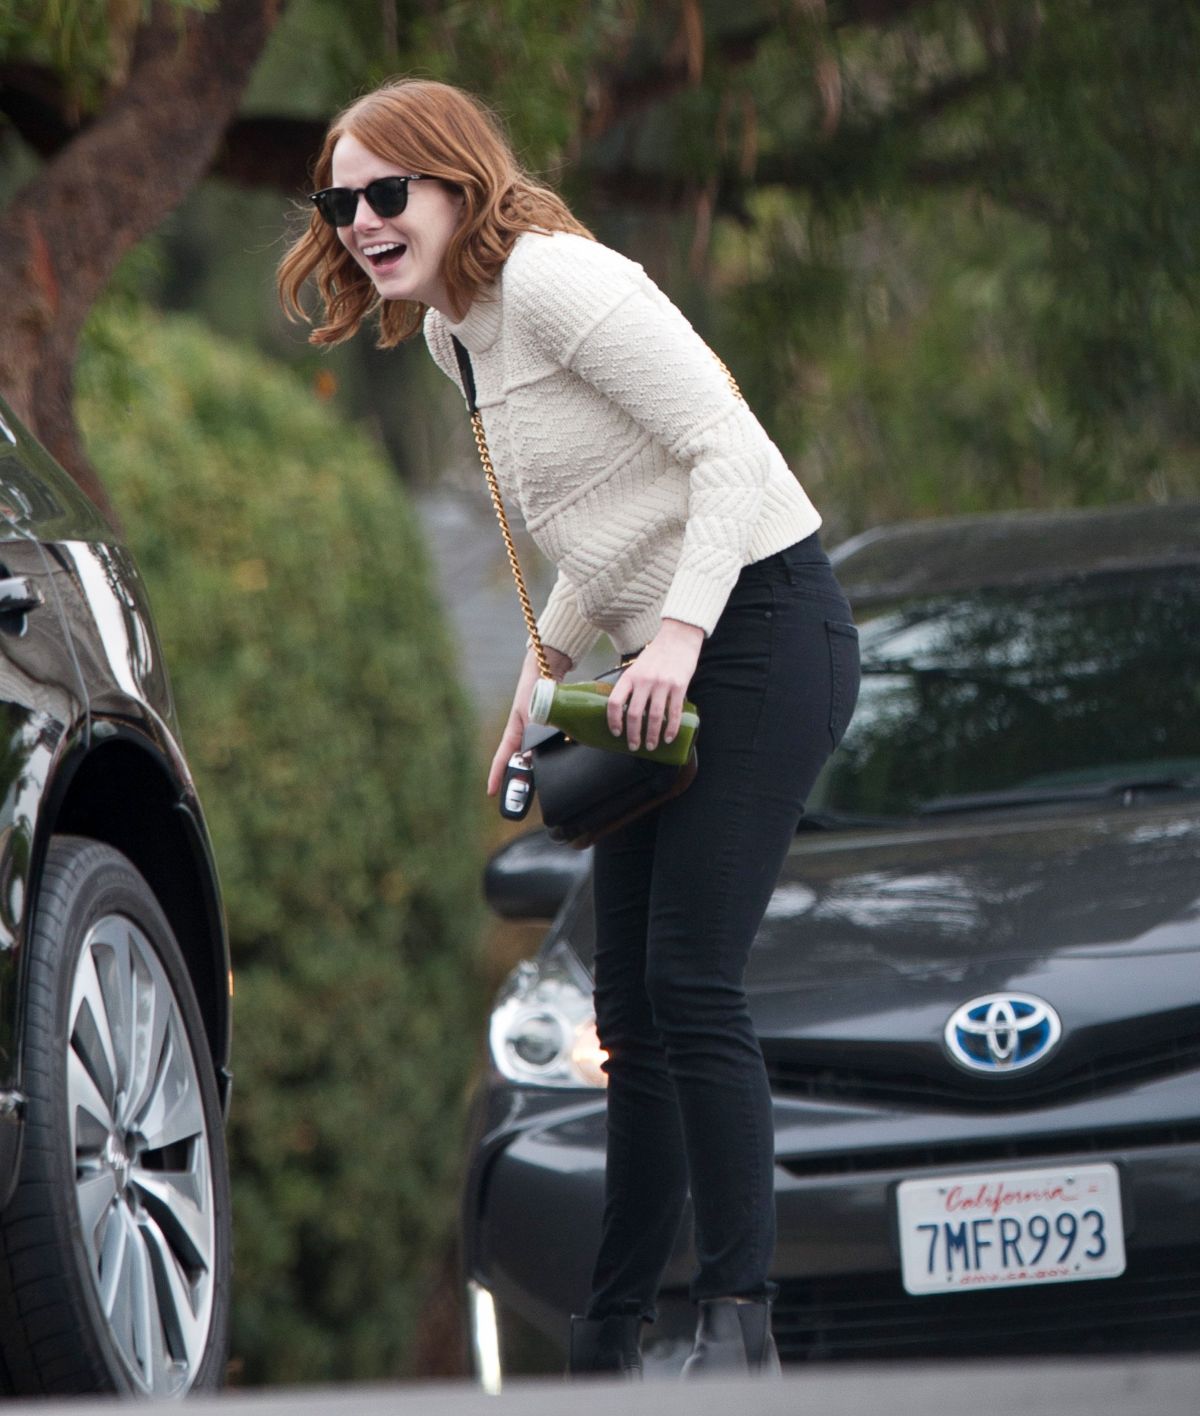 EMMA STONE Out in Los Angeles | Stunning Actress